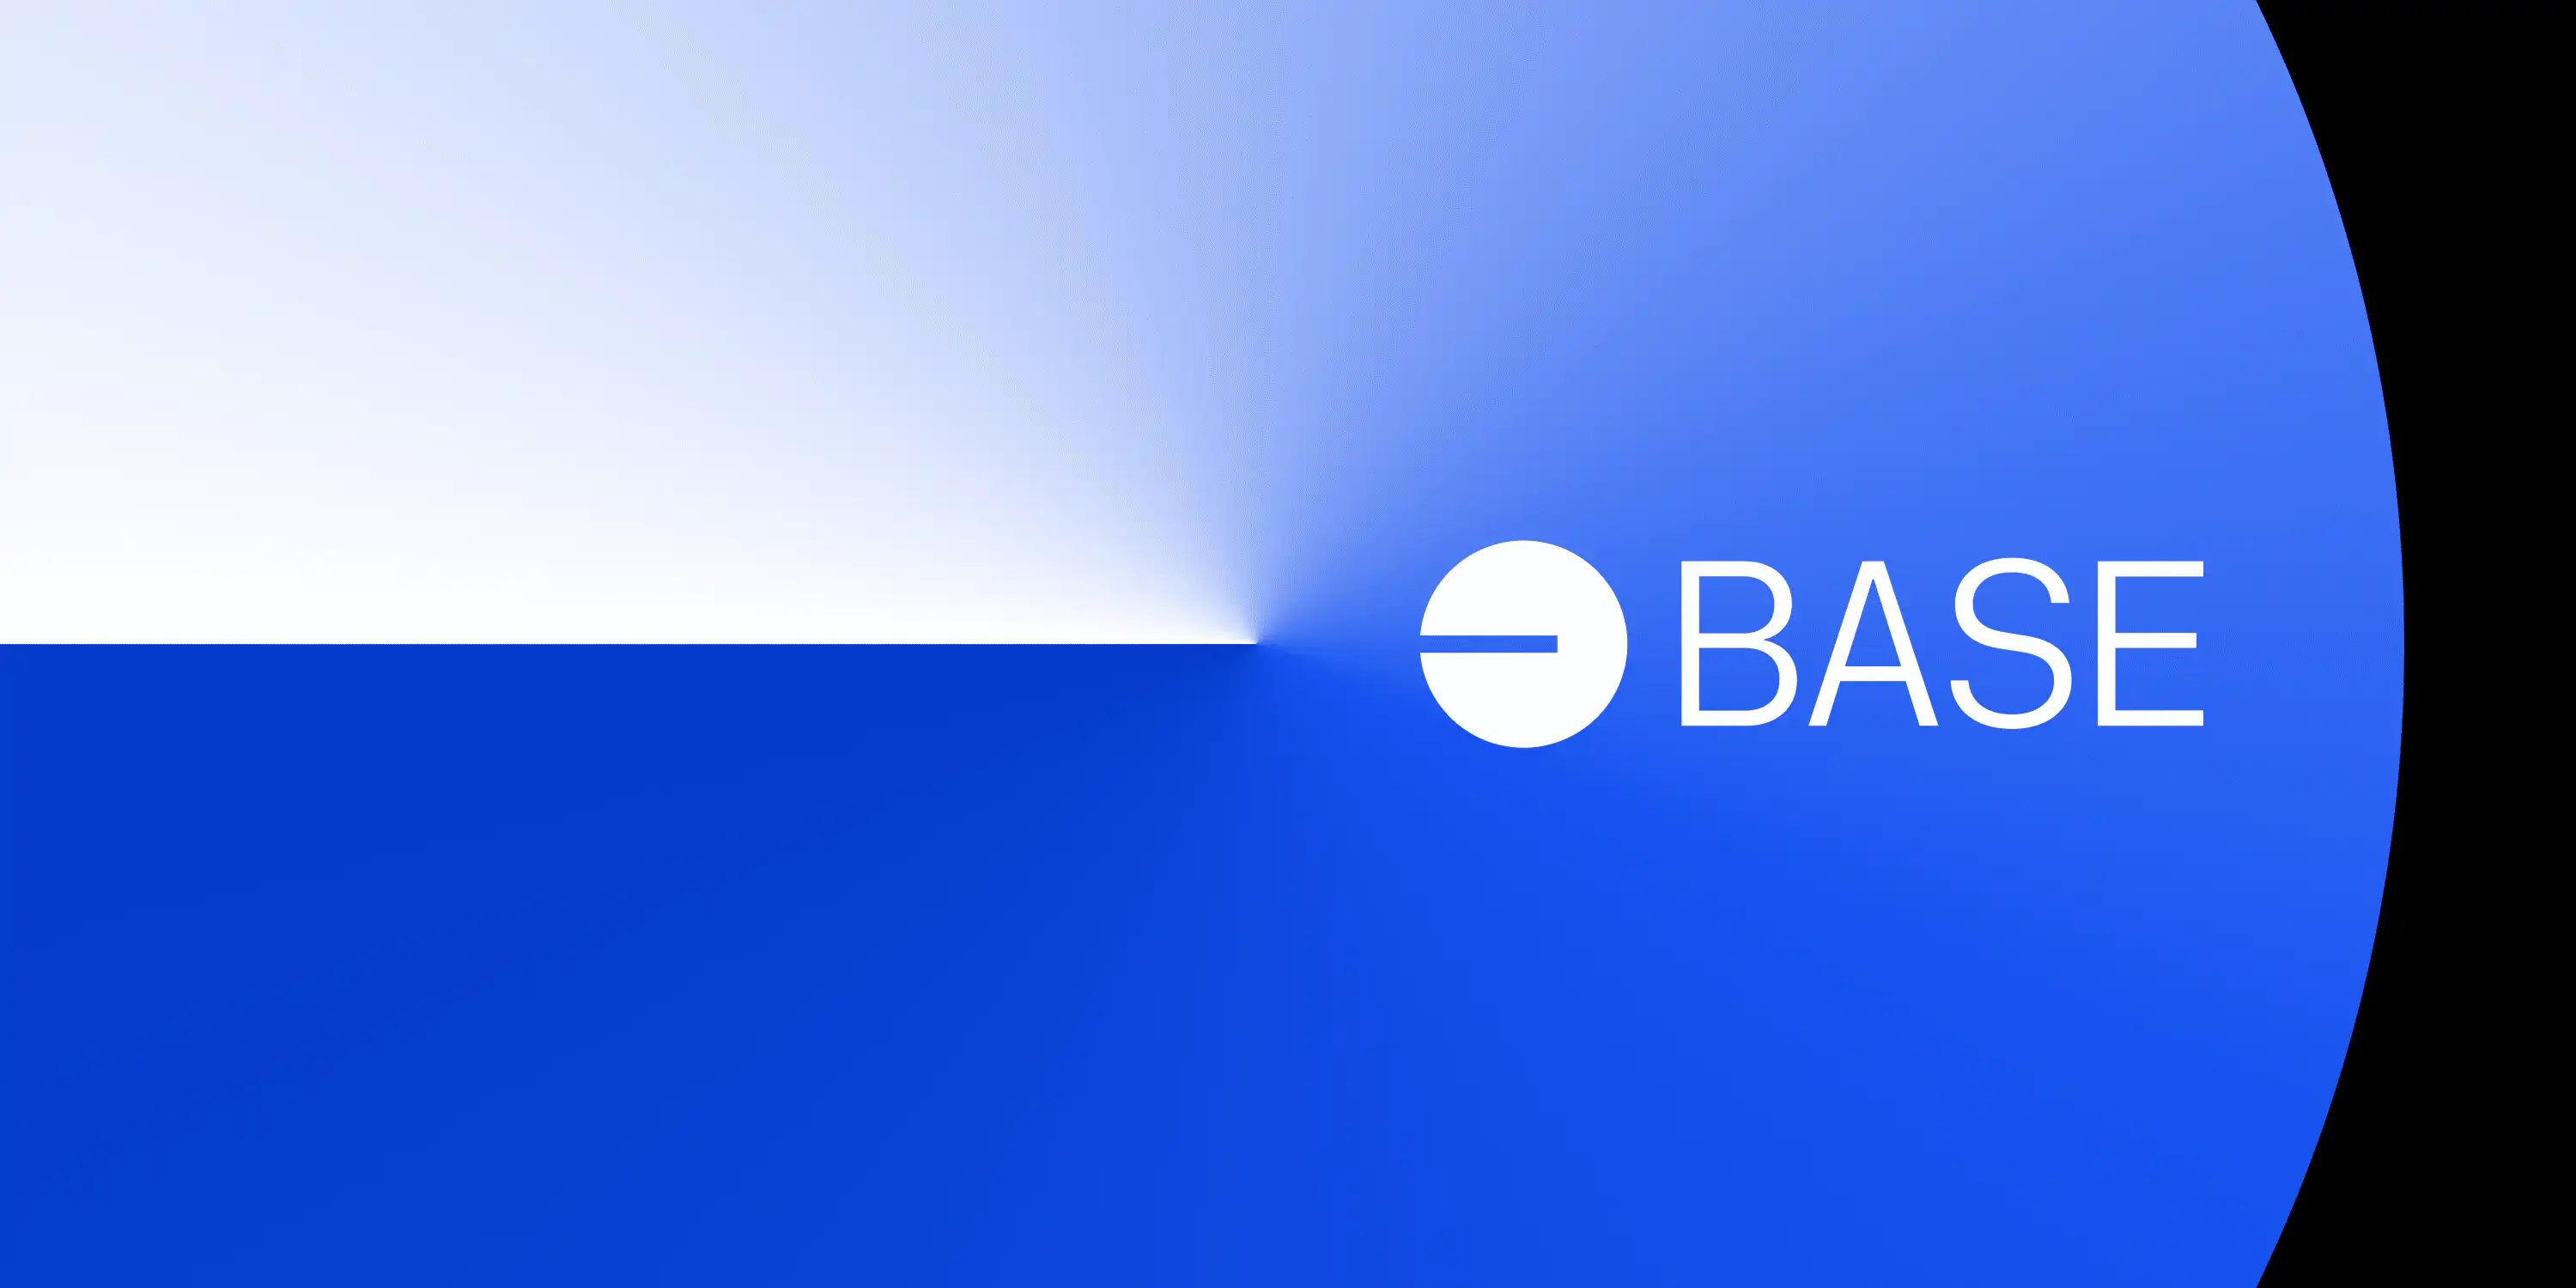 Just In: Coinbase Unveils New Product “Base” To Rival Layer-2 Networks